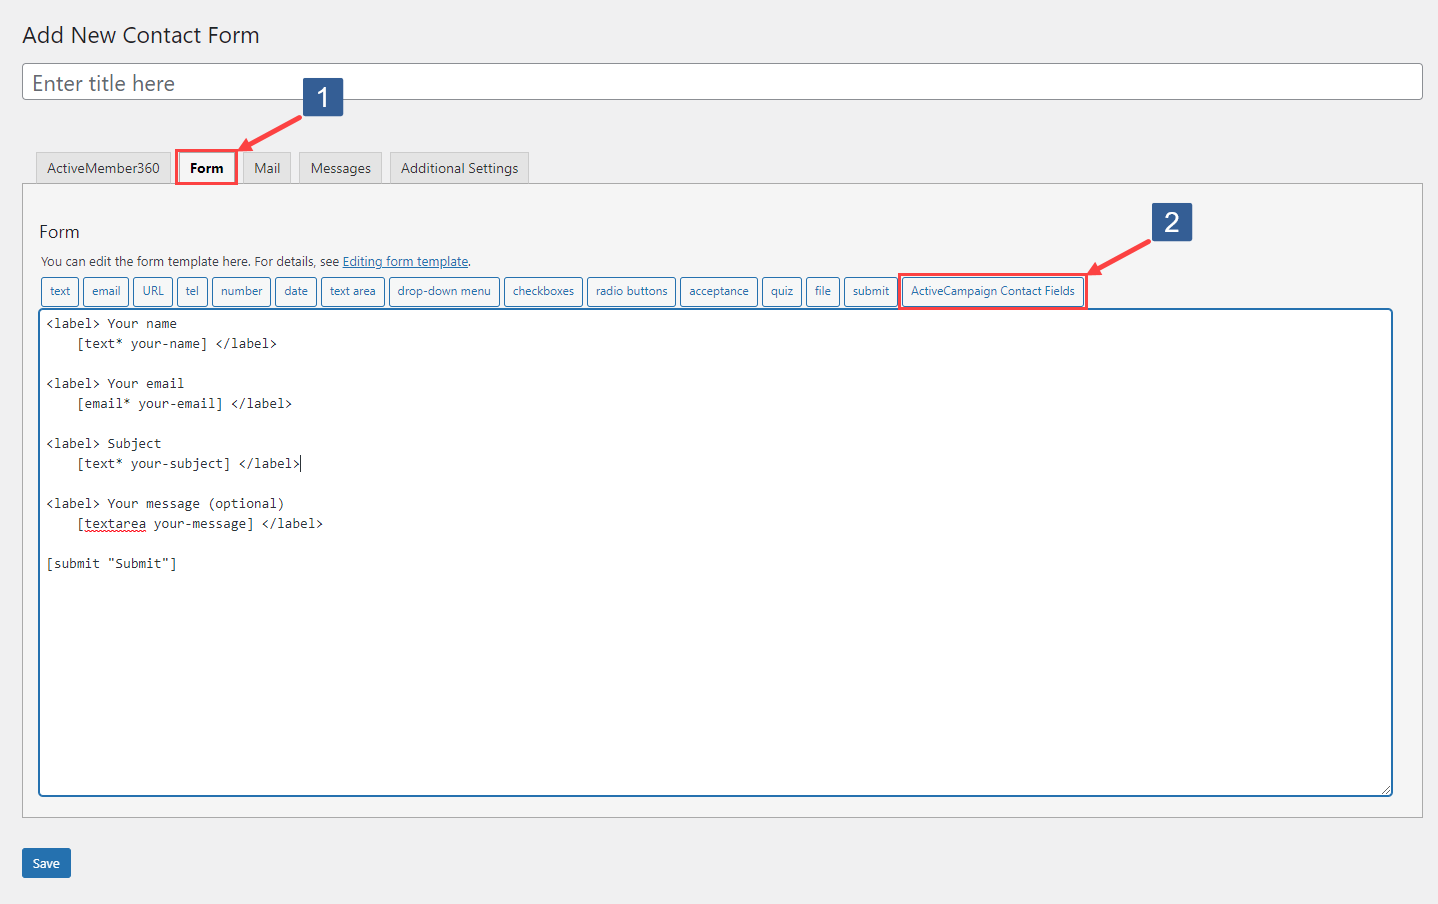 Steps for selecting ActiveCampaign contact fields